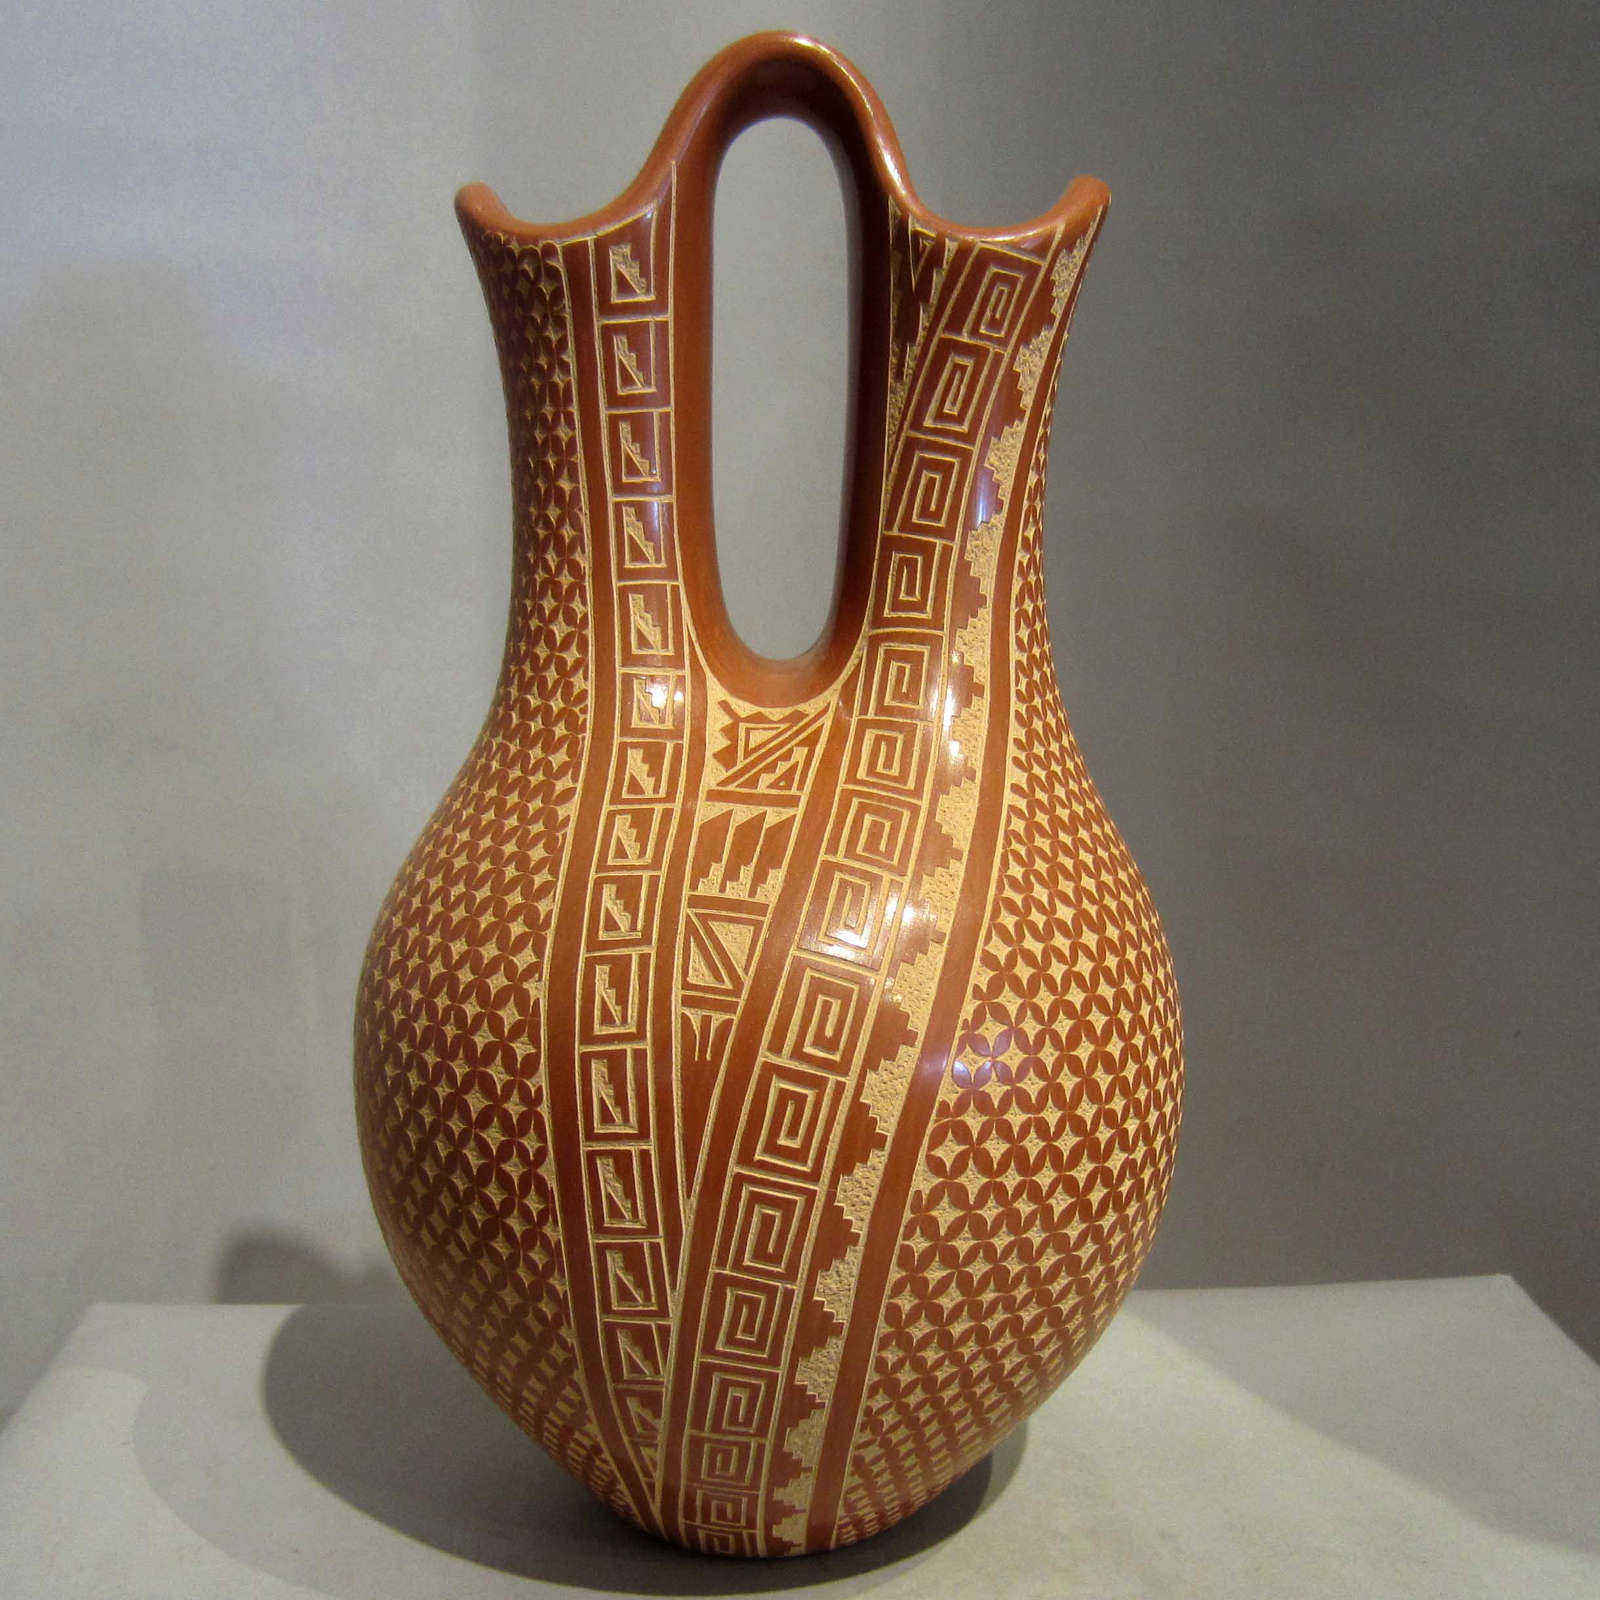 12 Recommended Cherokee Wedding Vase for Sale 2024 free download cherokee wedding vase for sale of wilma baca tosa wedding vases 1 jemez pueblo potters in the within sgraffito geometric designs on a polished red wedding vase